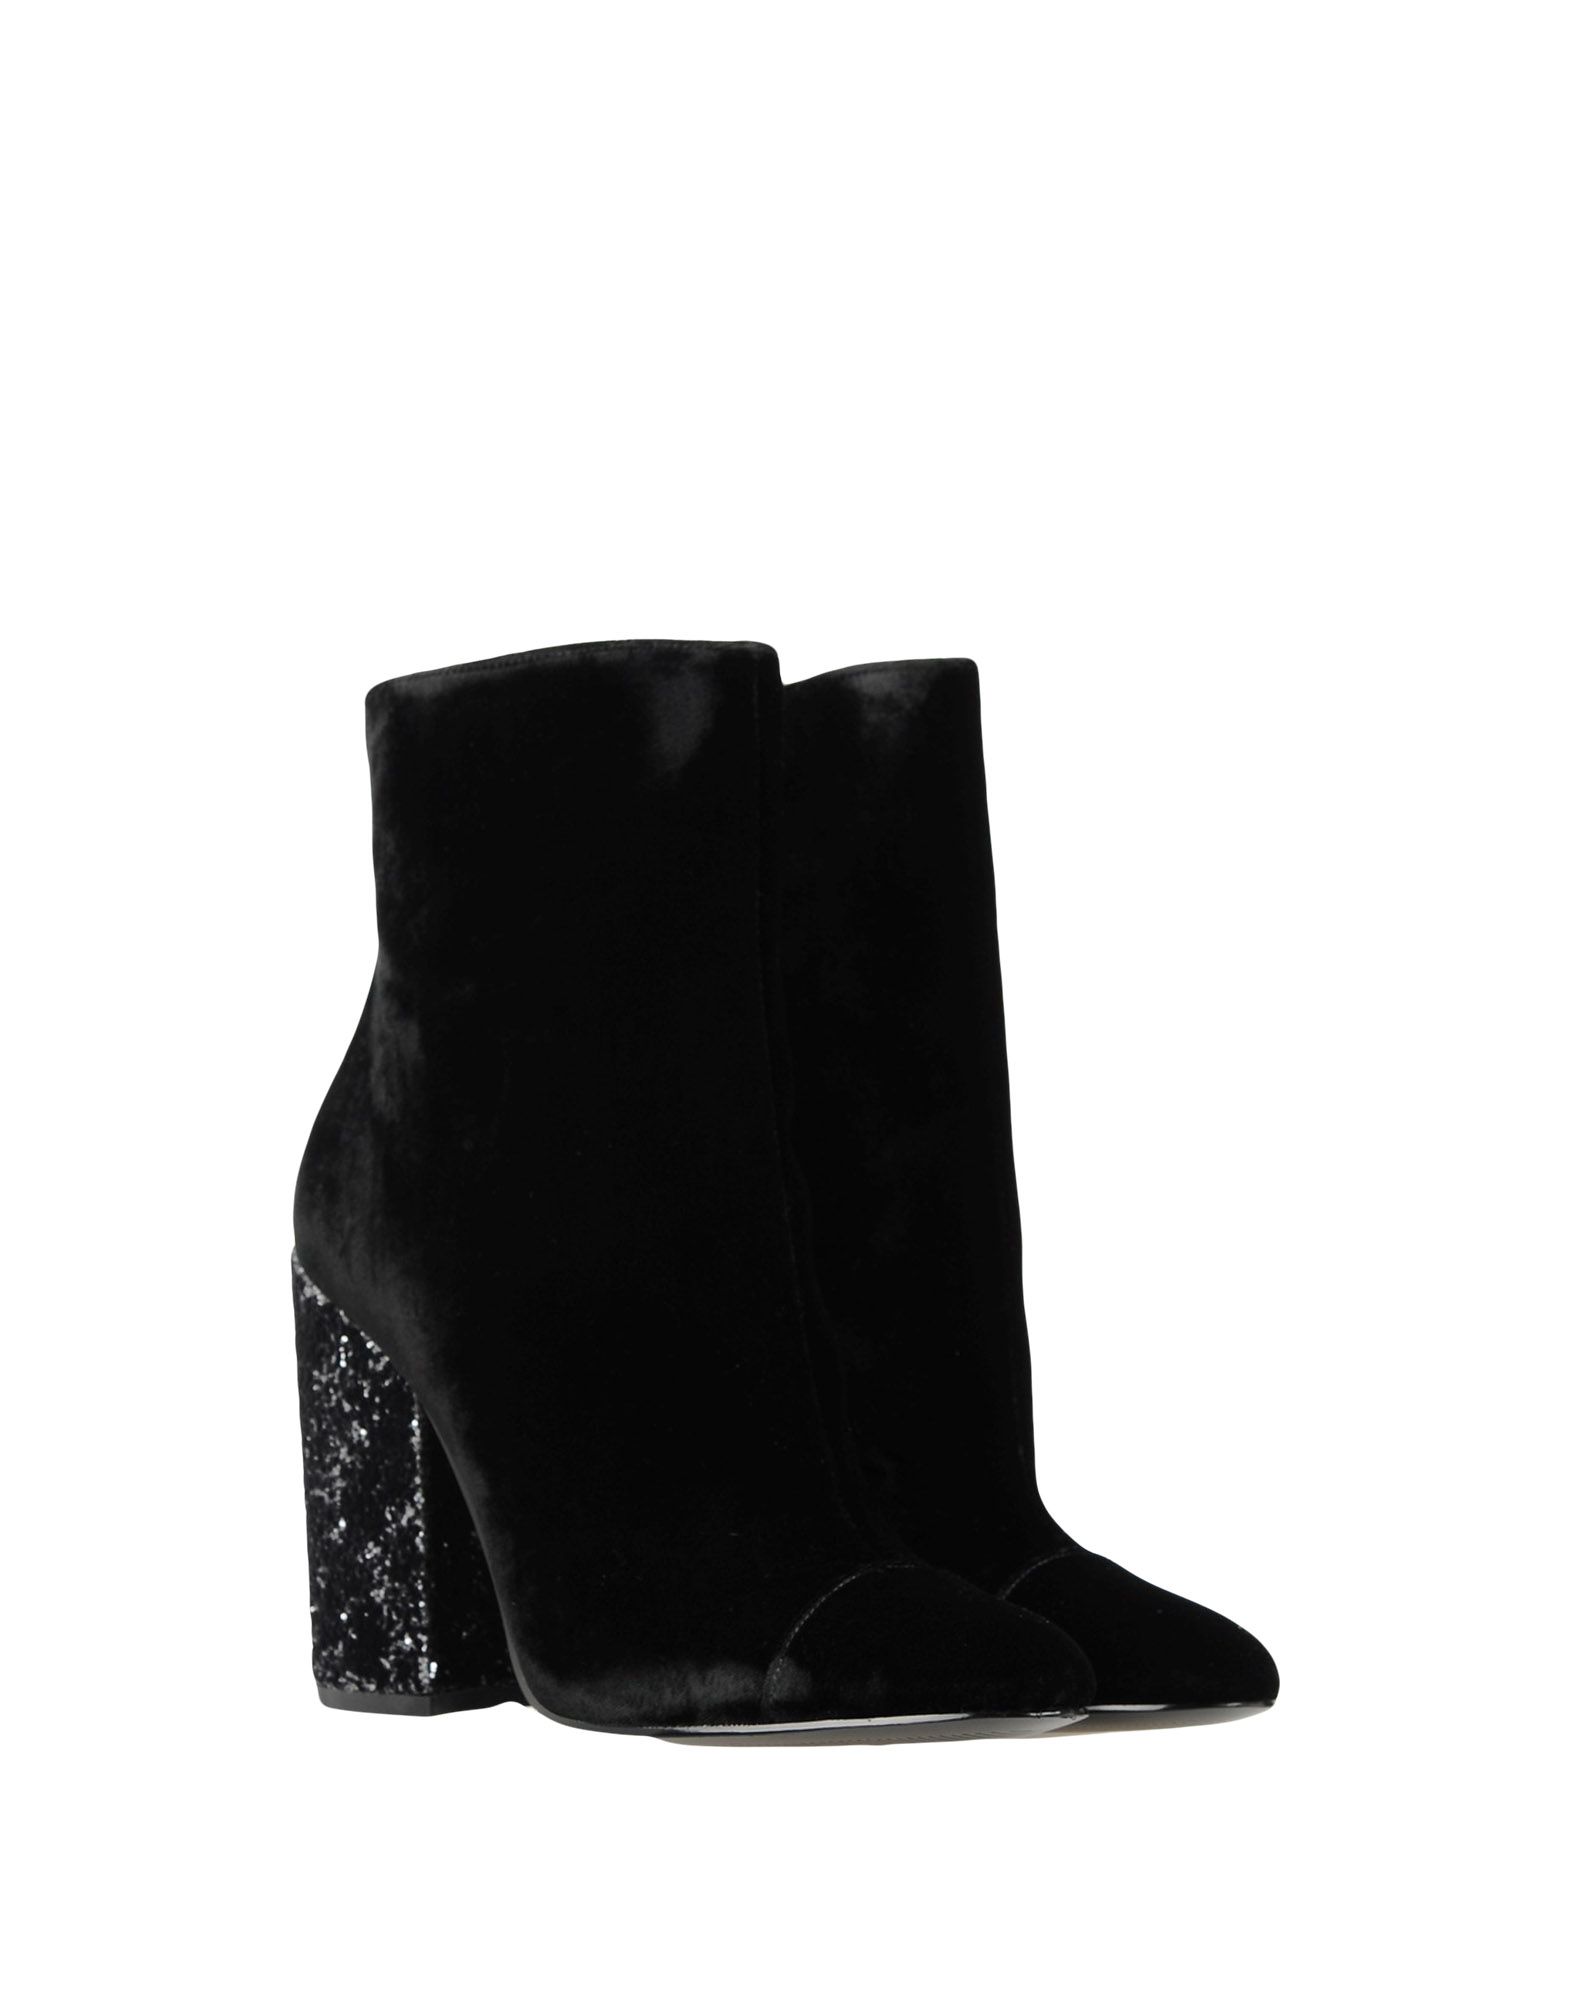 KENDALL + KYLIE ANKLE BOOTS,11324248UV 5